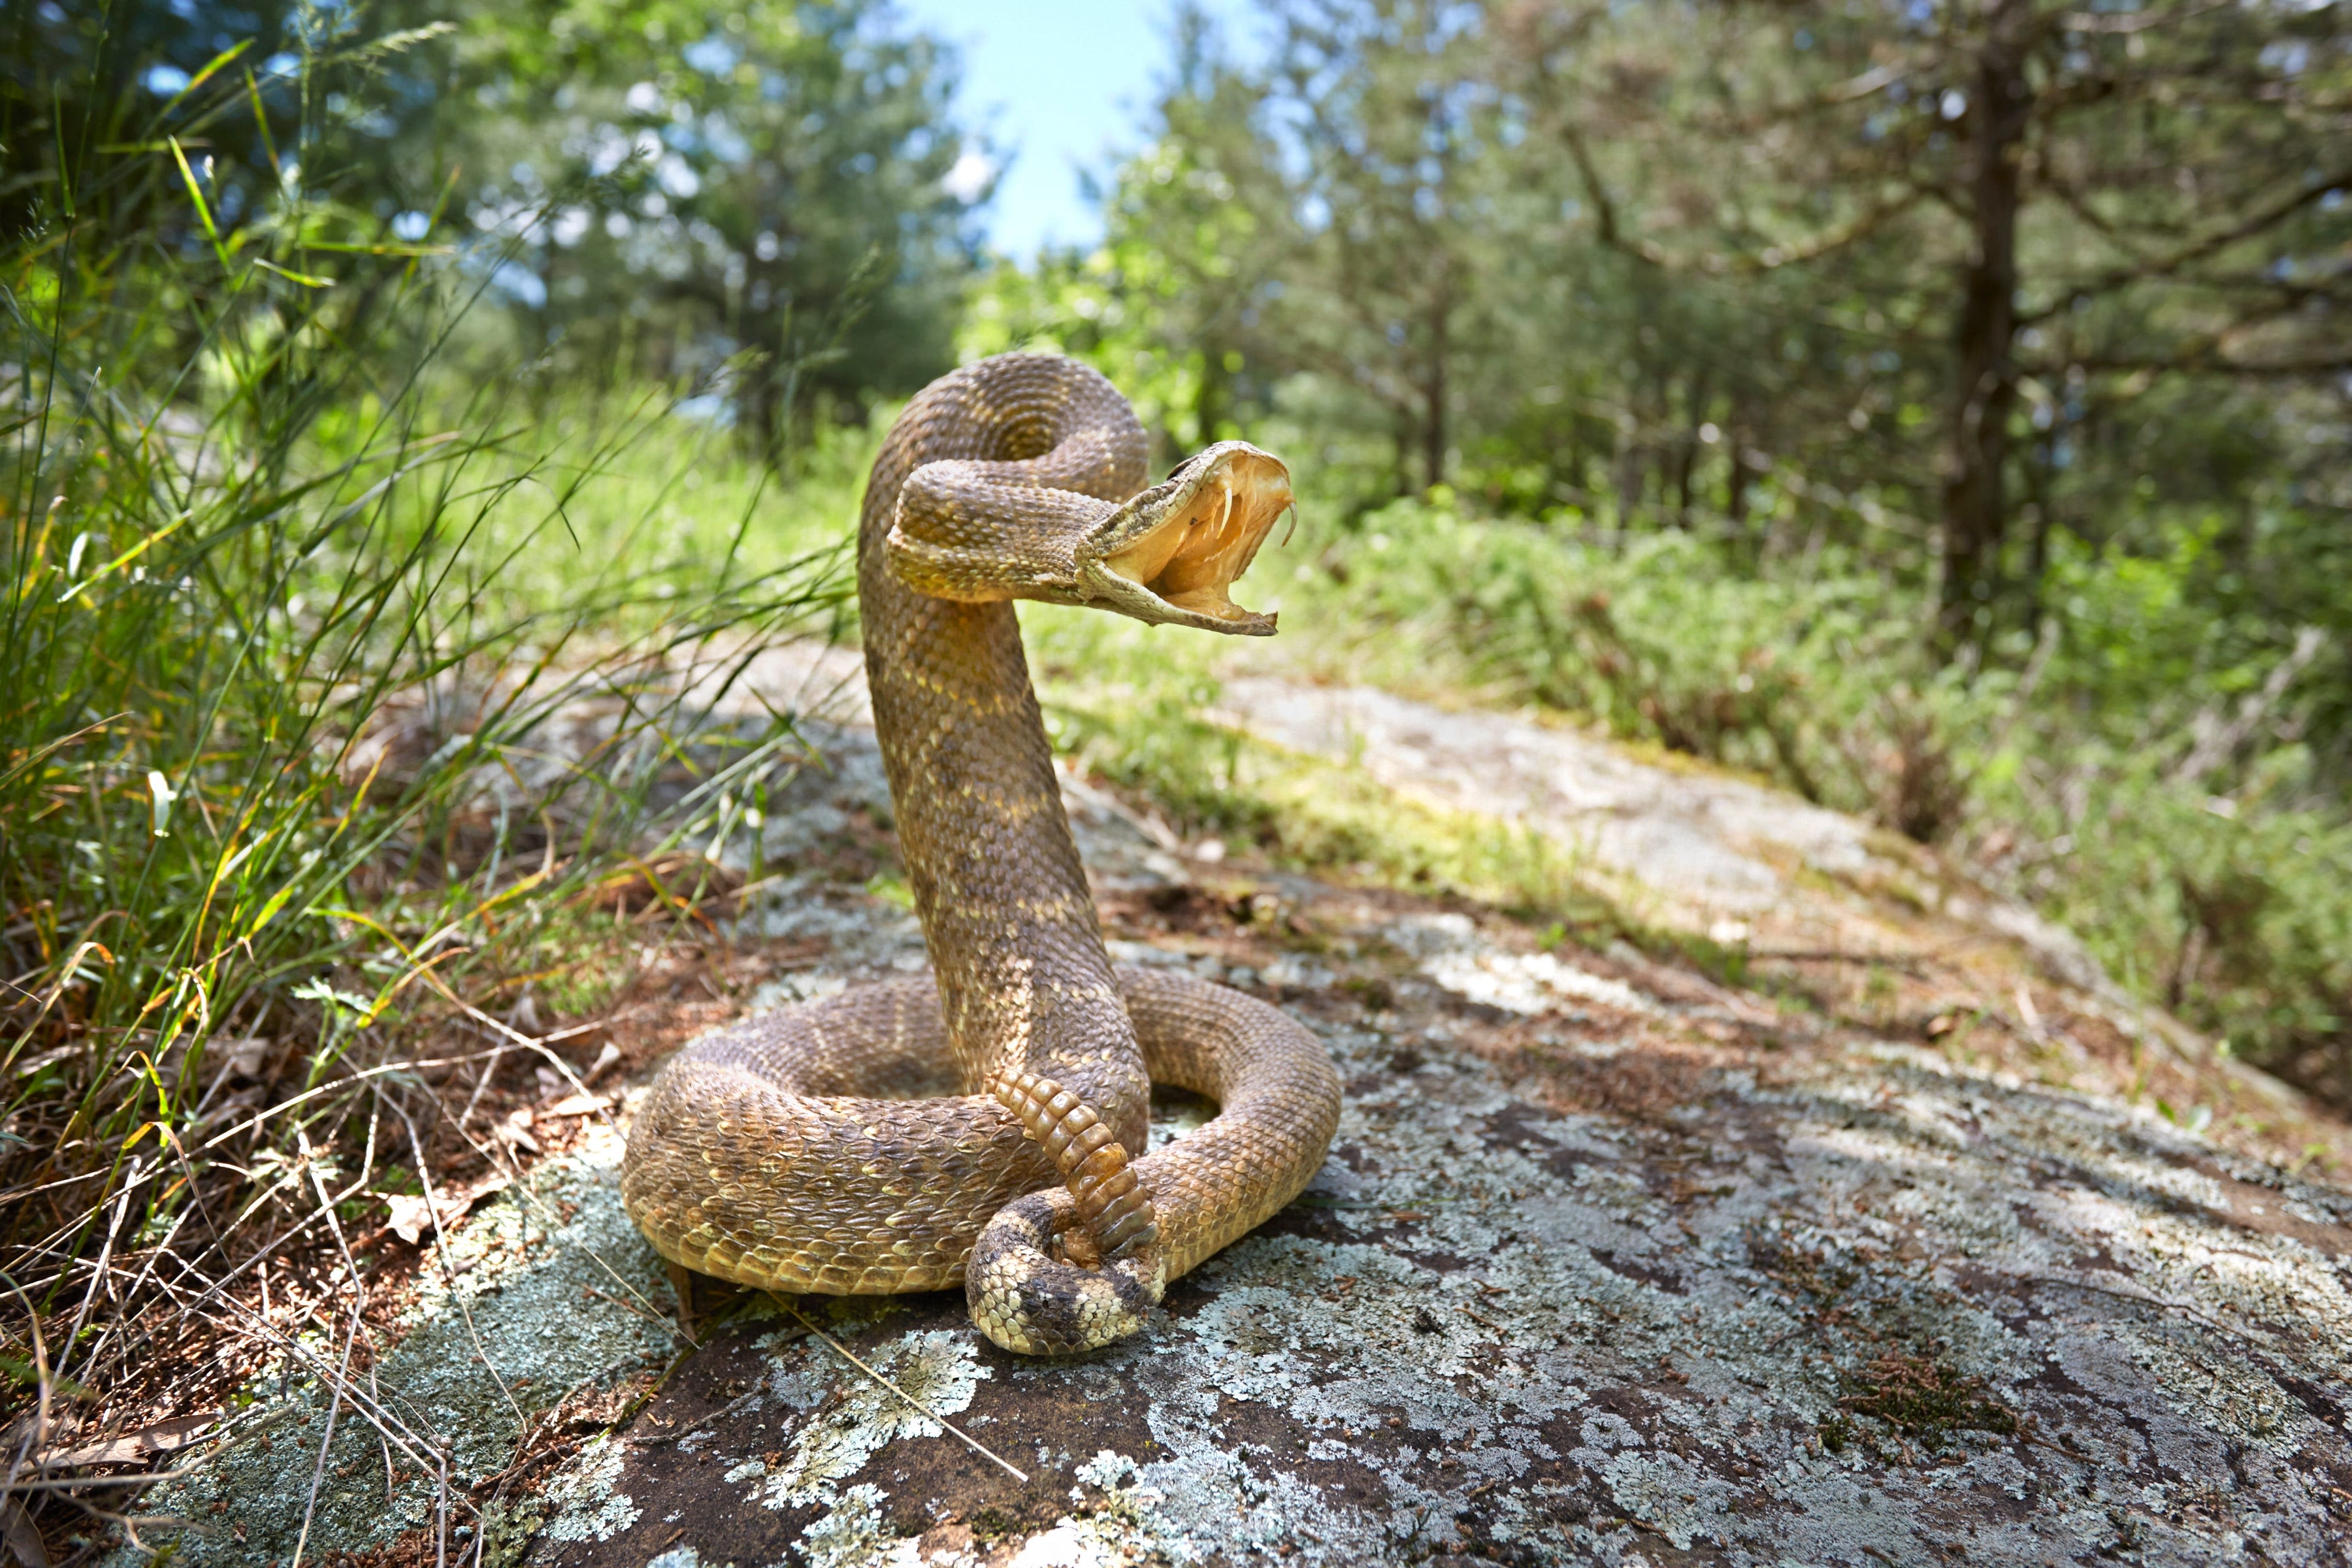 Rattlesnake bites expected to surge in August. Here's how to stay safe